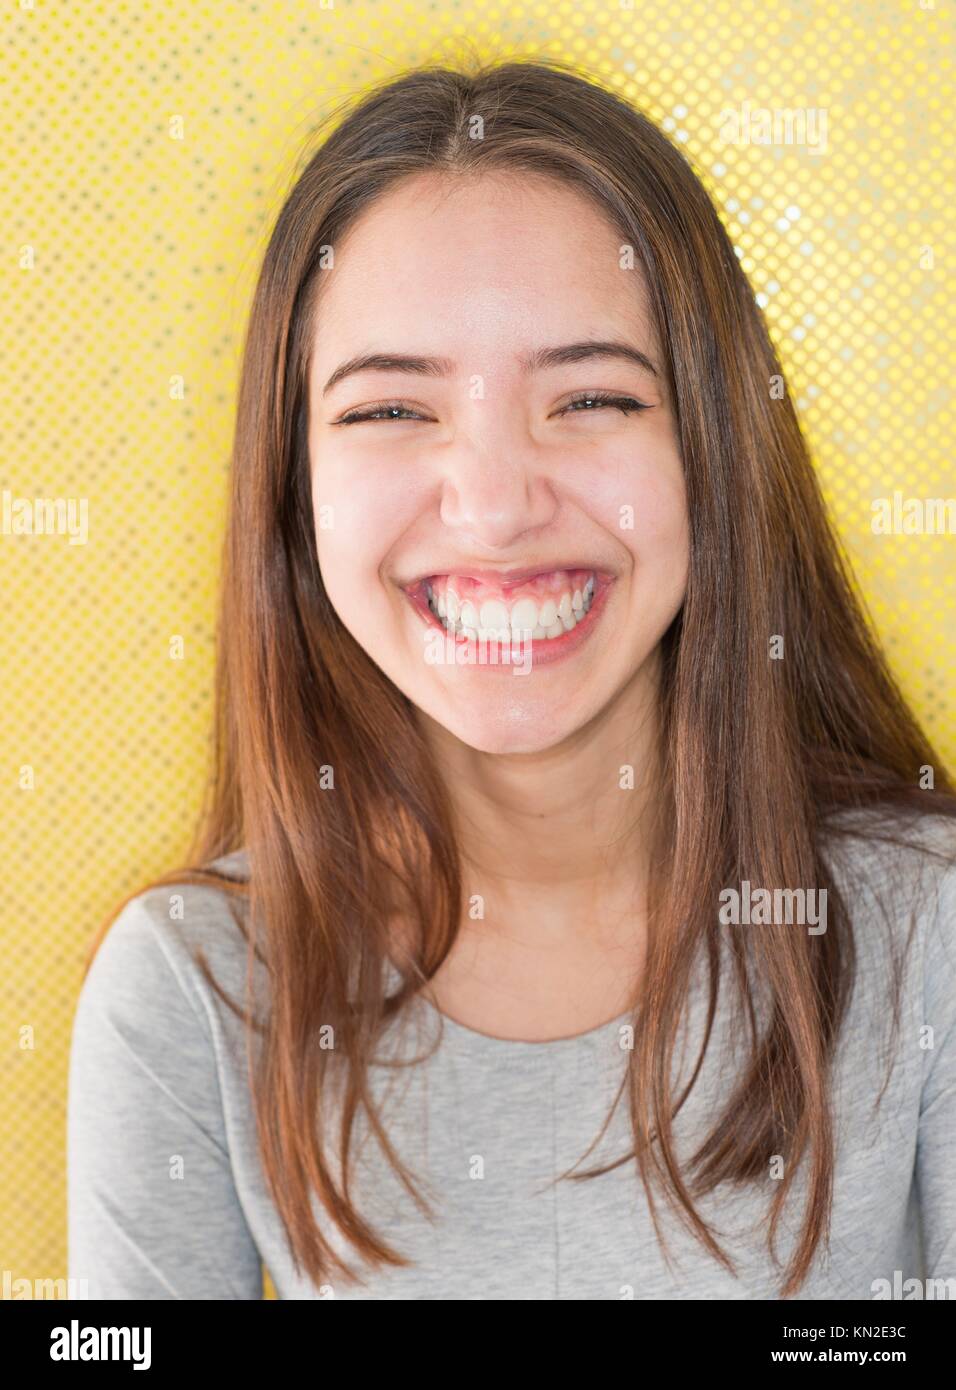 Playful teenage girl having fun and laughing in front of funky yellow dotted background Stock Photo